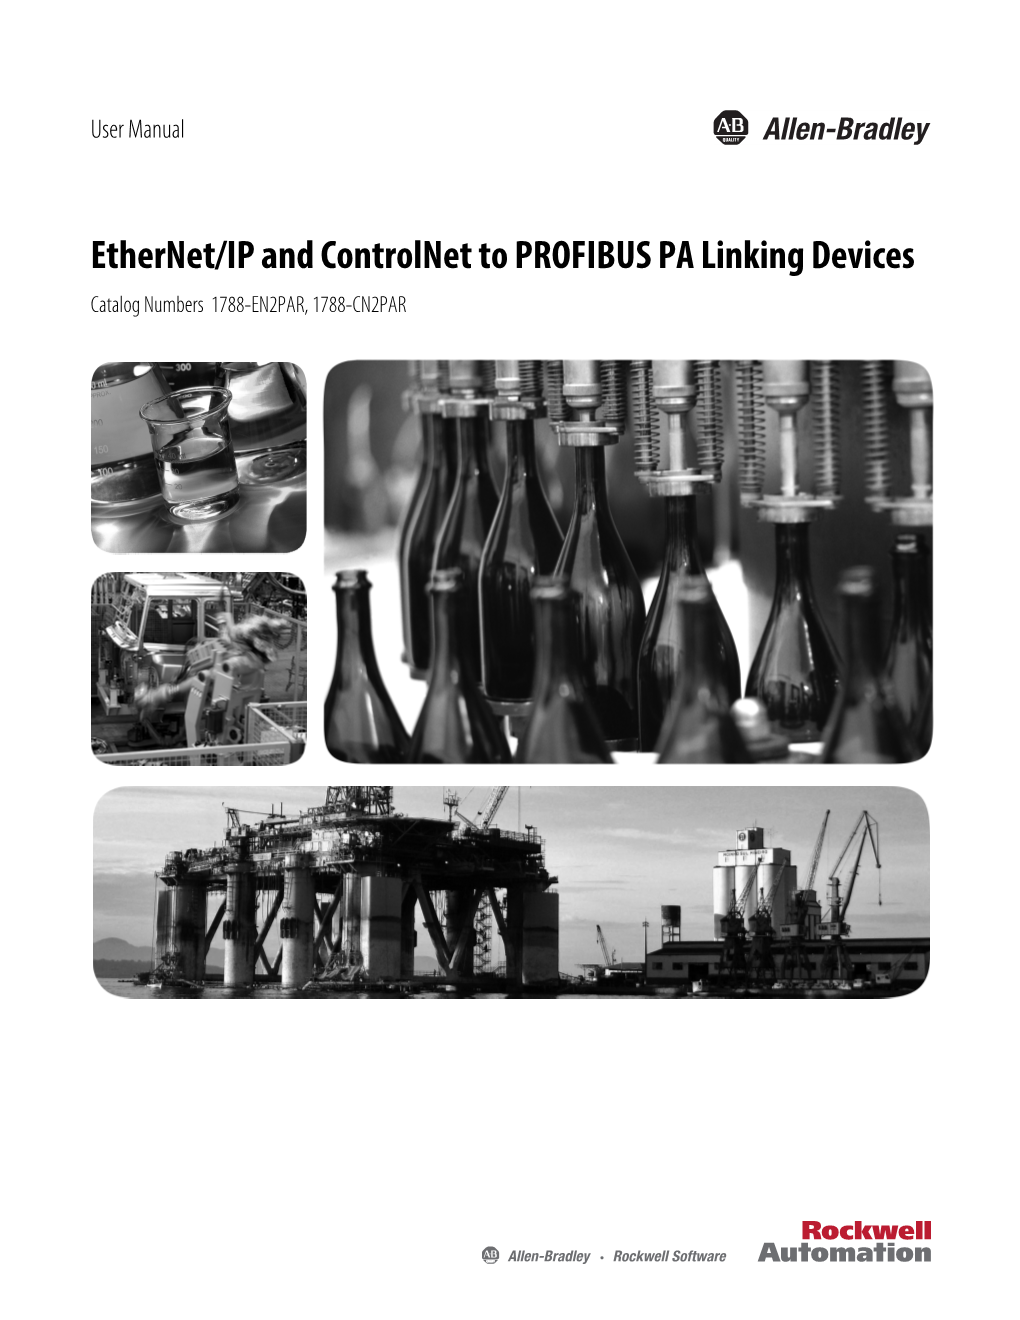 Ethernet/IP and Controlnet to PROFIBUS PA Linking Devices User Manual